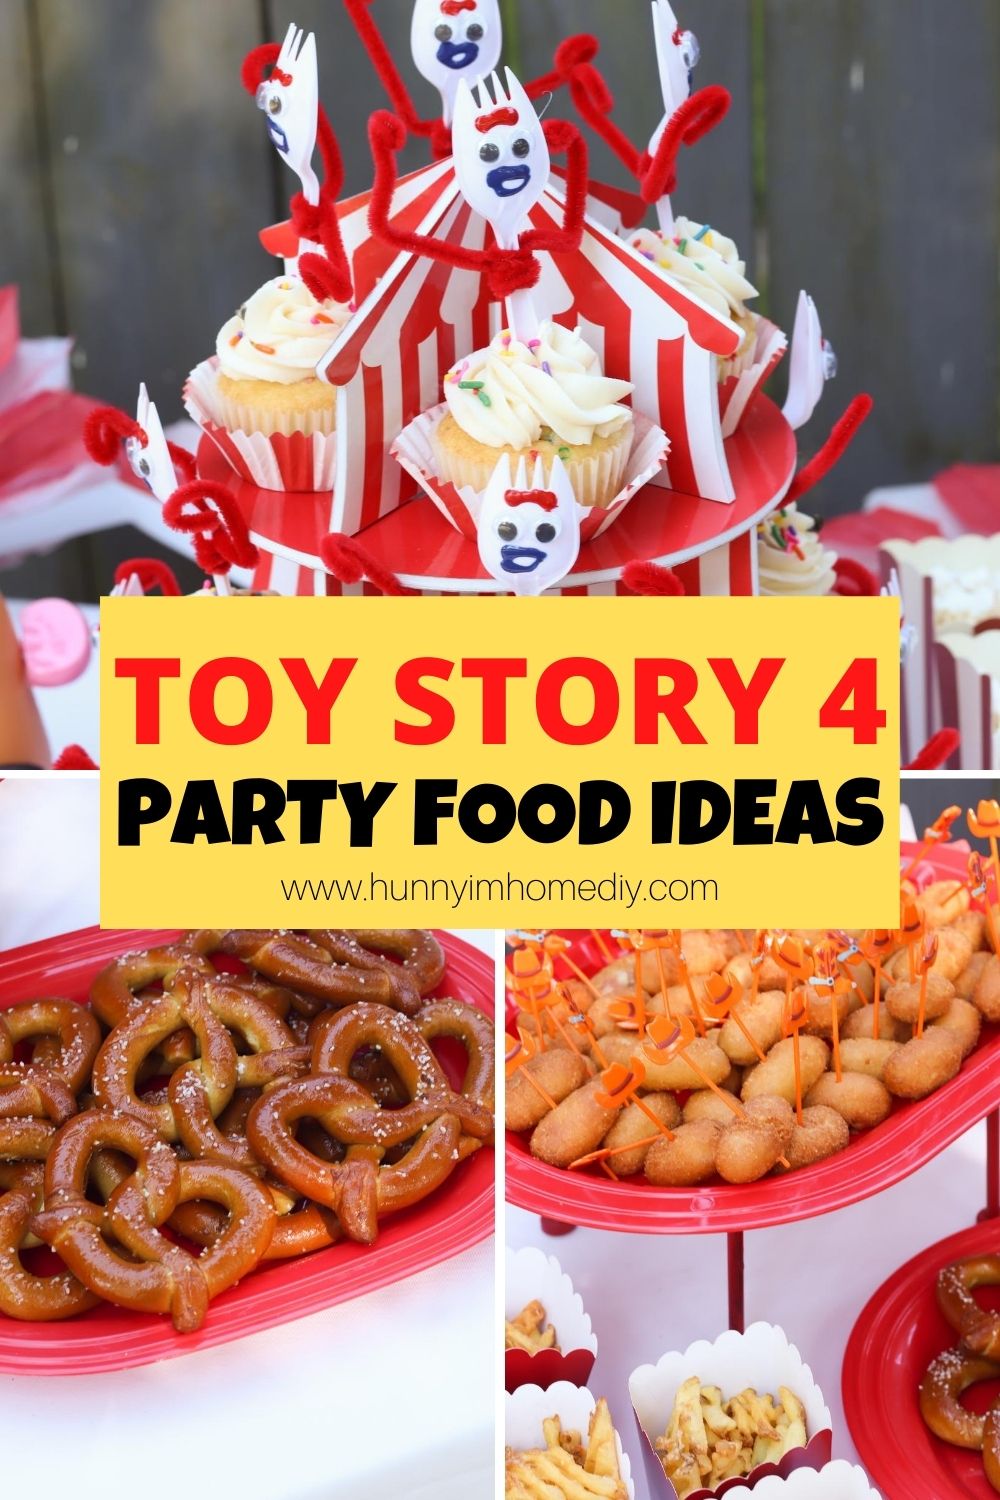 Toy Story 4 Food Ideas for Your Party Hunny I'm Home DIY